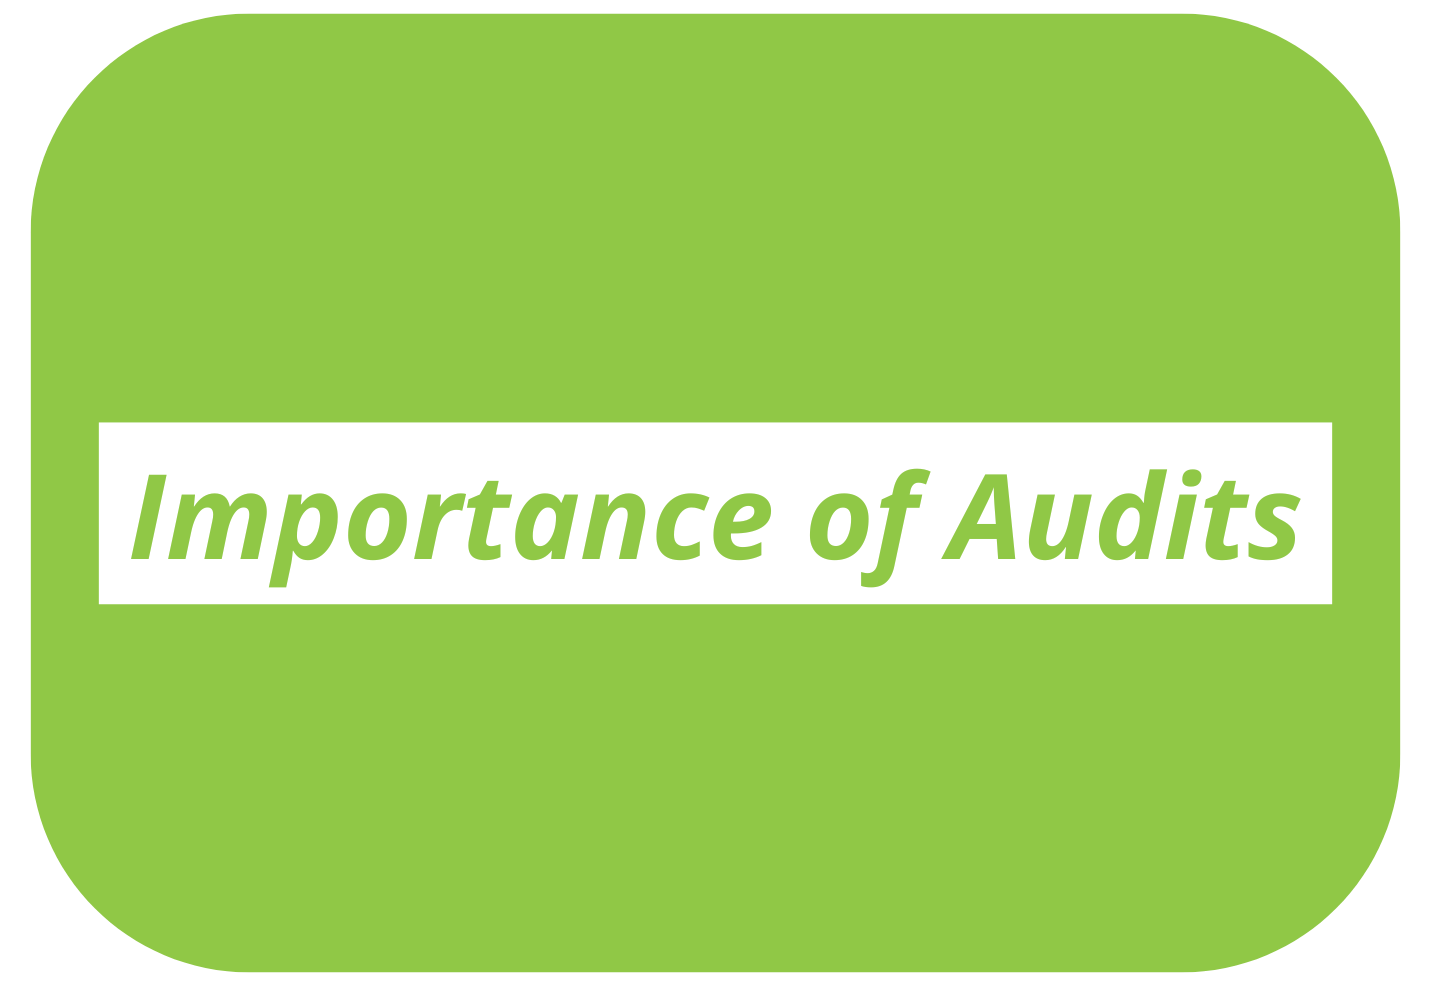 Importance of Audits